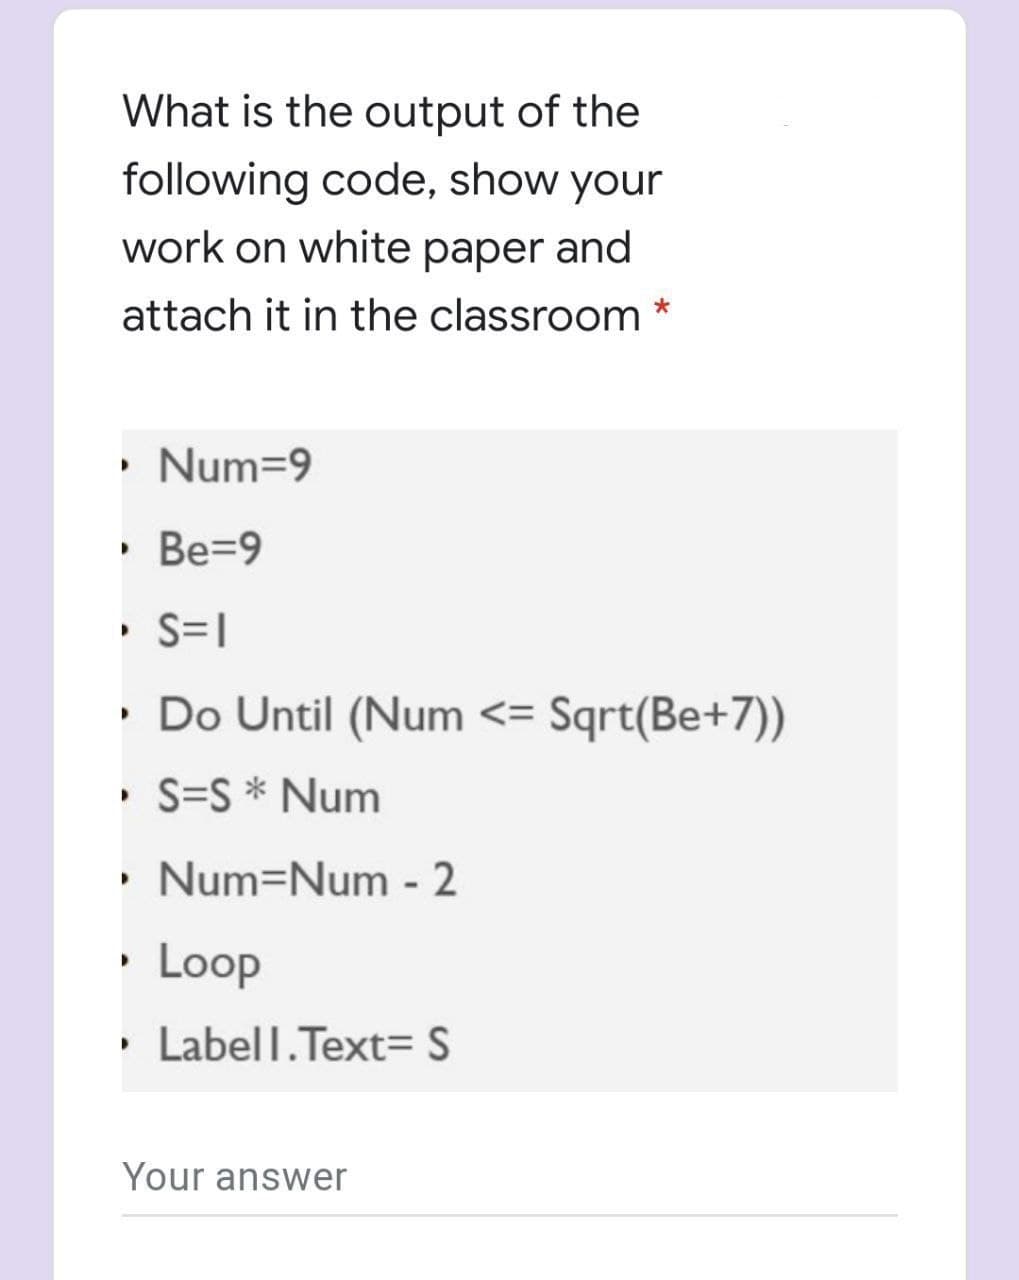 What is the output of the
following code, show your
work on white paper and
attach it in the classroom *
• Num=9
• Be=9
• S=|
• Do Until (Num <= Sqrt(Be+7))
• S=S * Num
• Num=Num - 2
• Loop
• Labell.Text= S
Your answer
